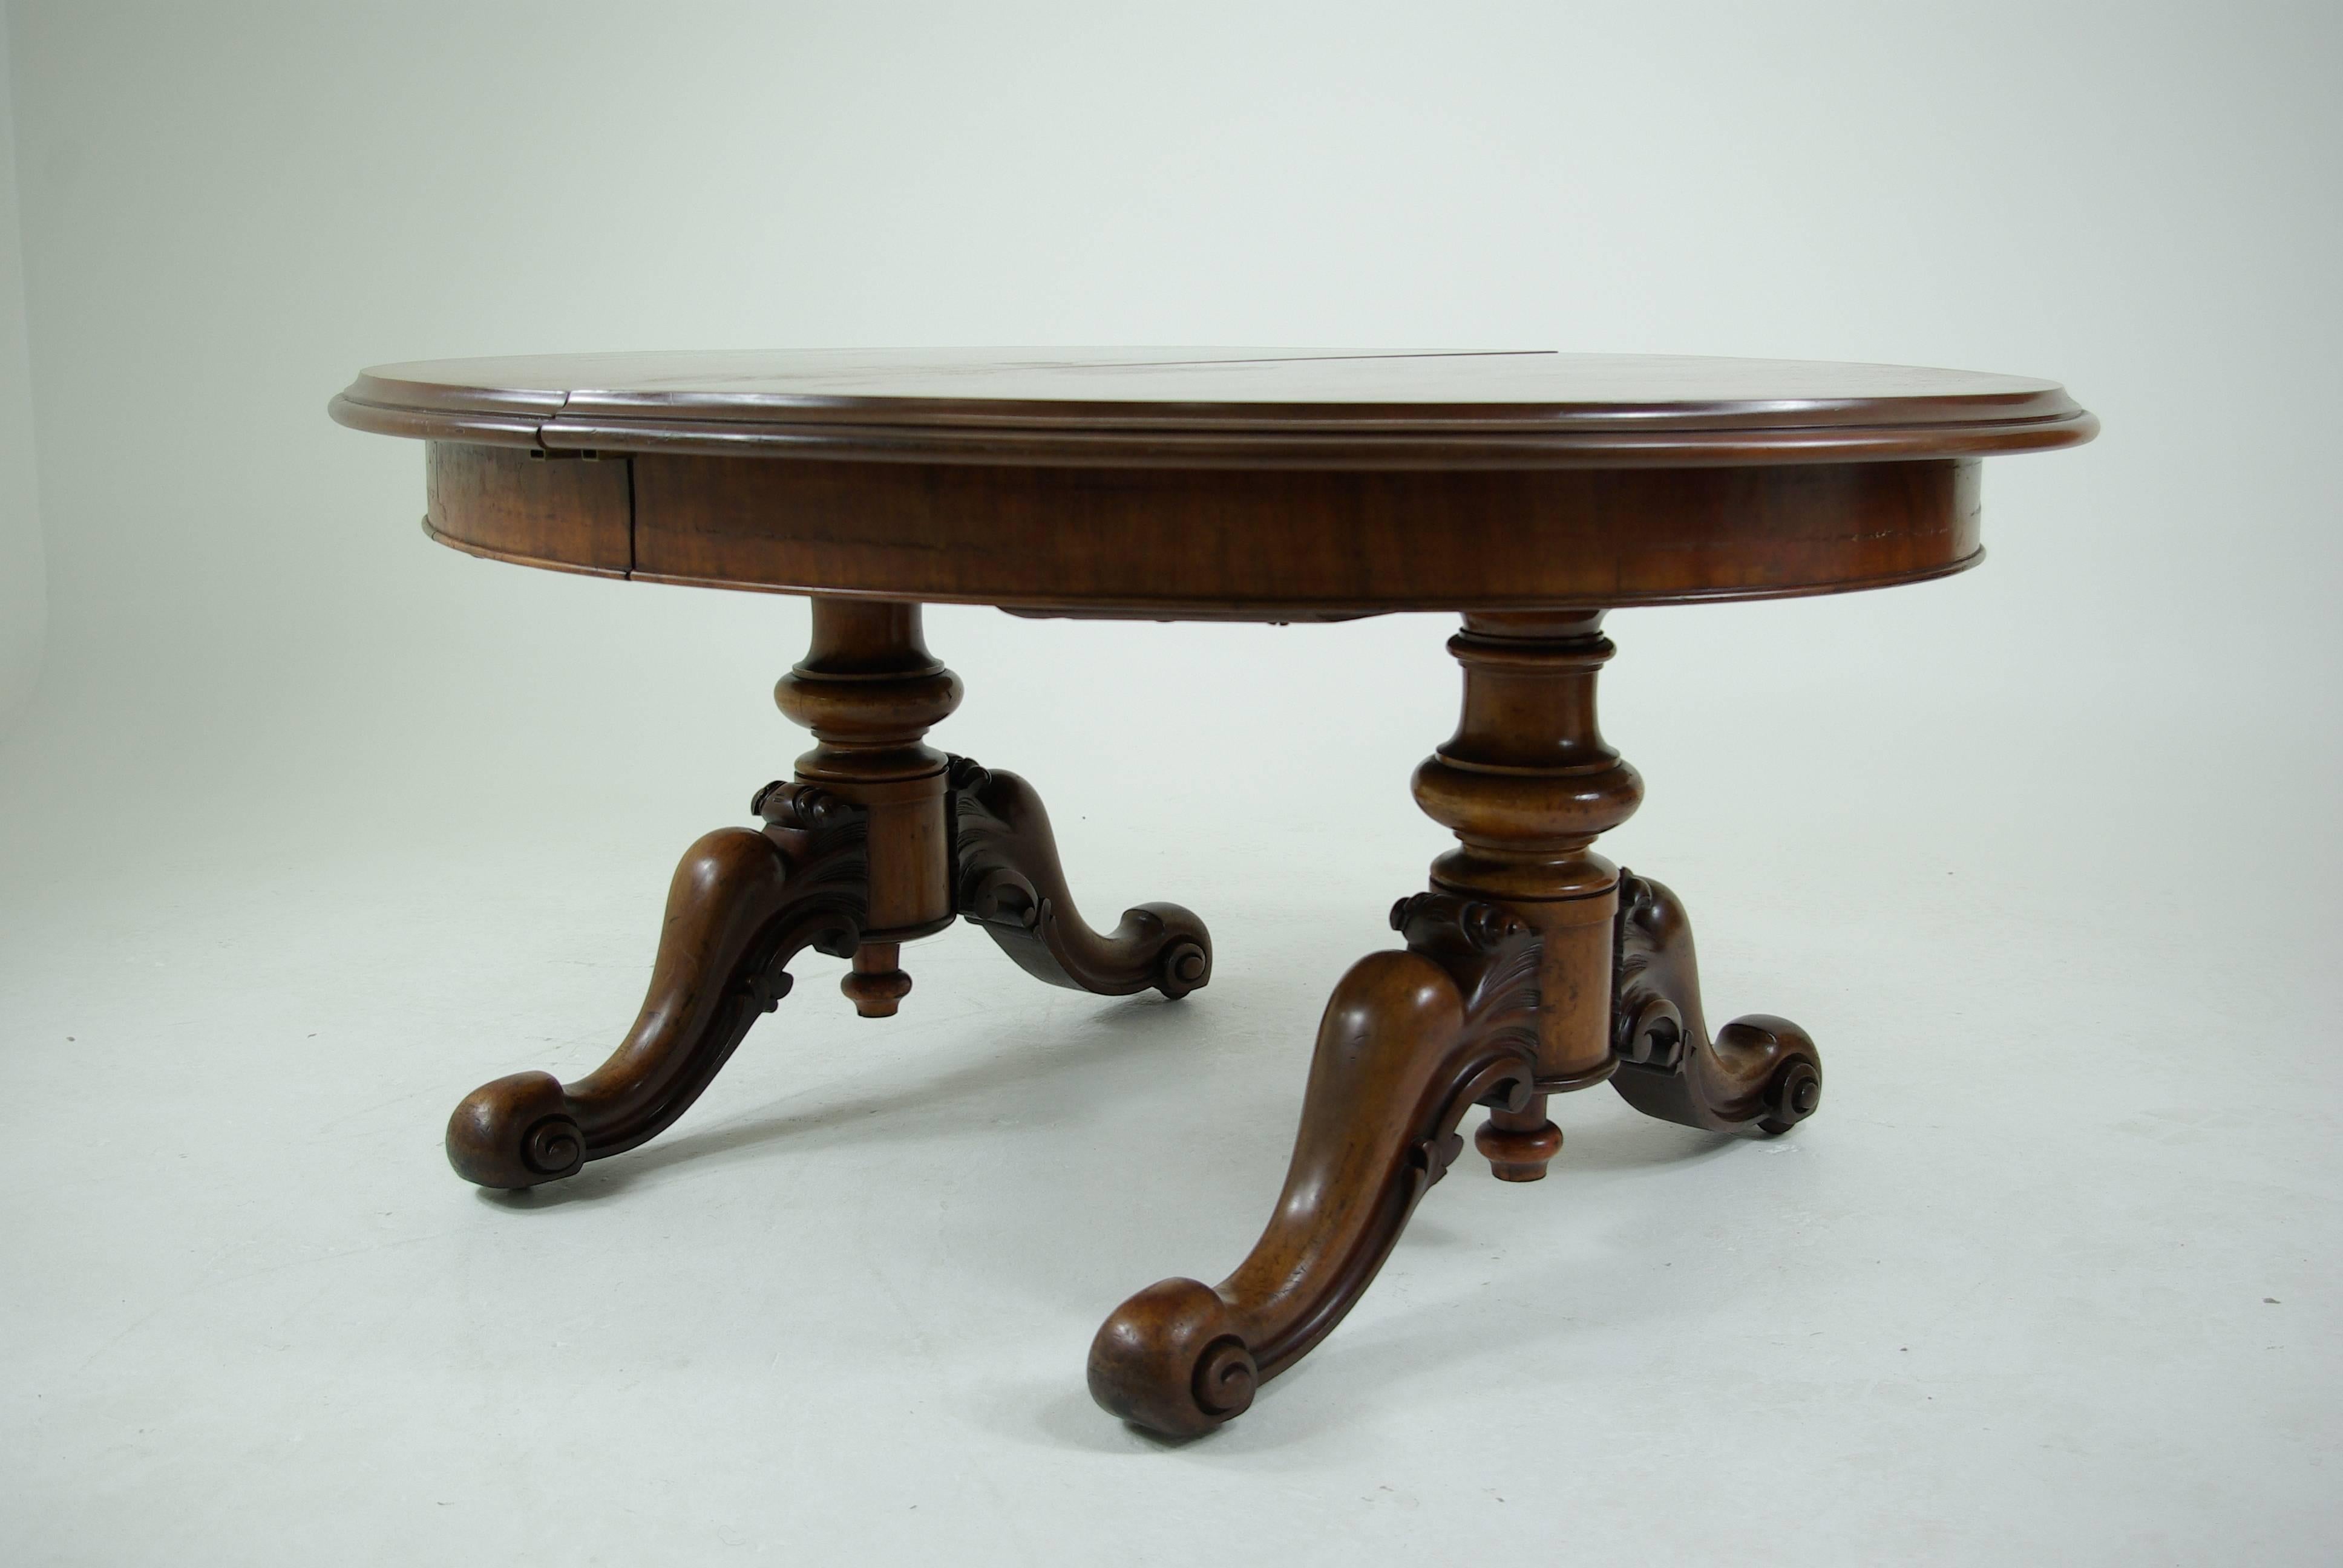 B305 Antique Scottish Oval Mahogany Dining Table, Carved Pedestals, 2 lg. Leaves 3